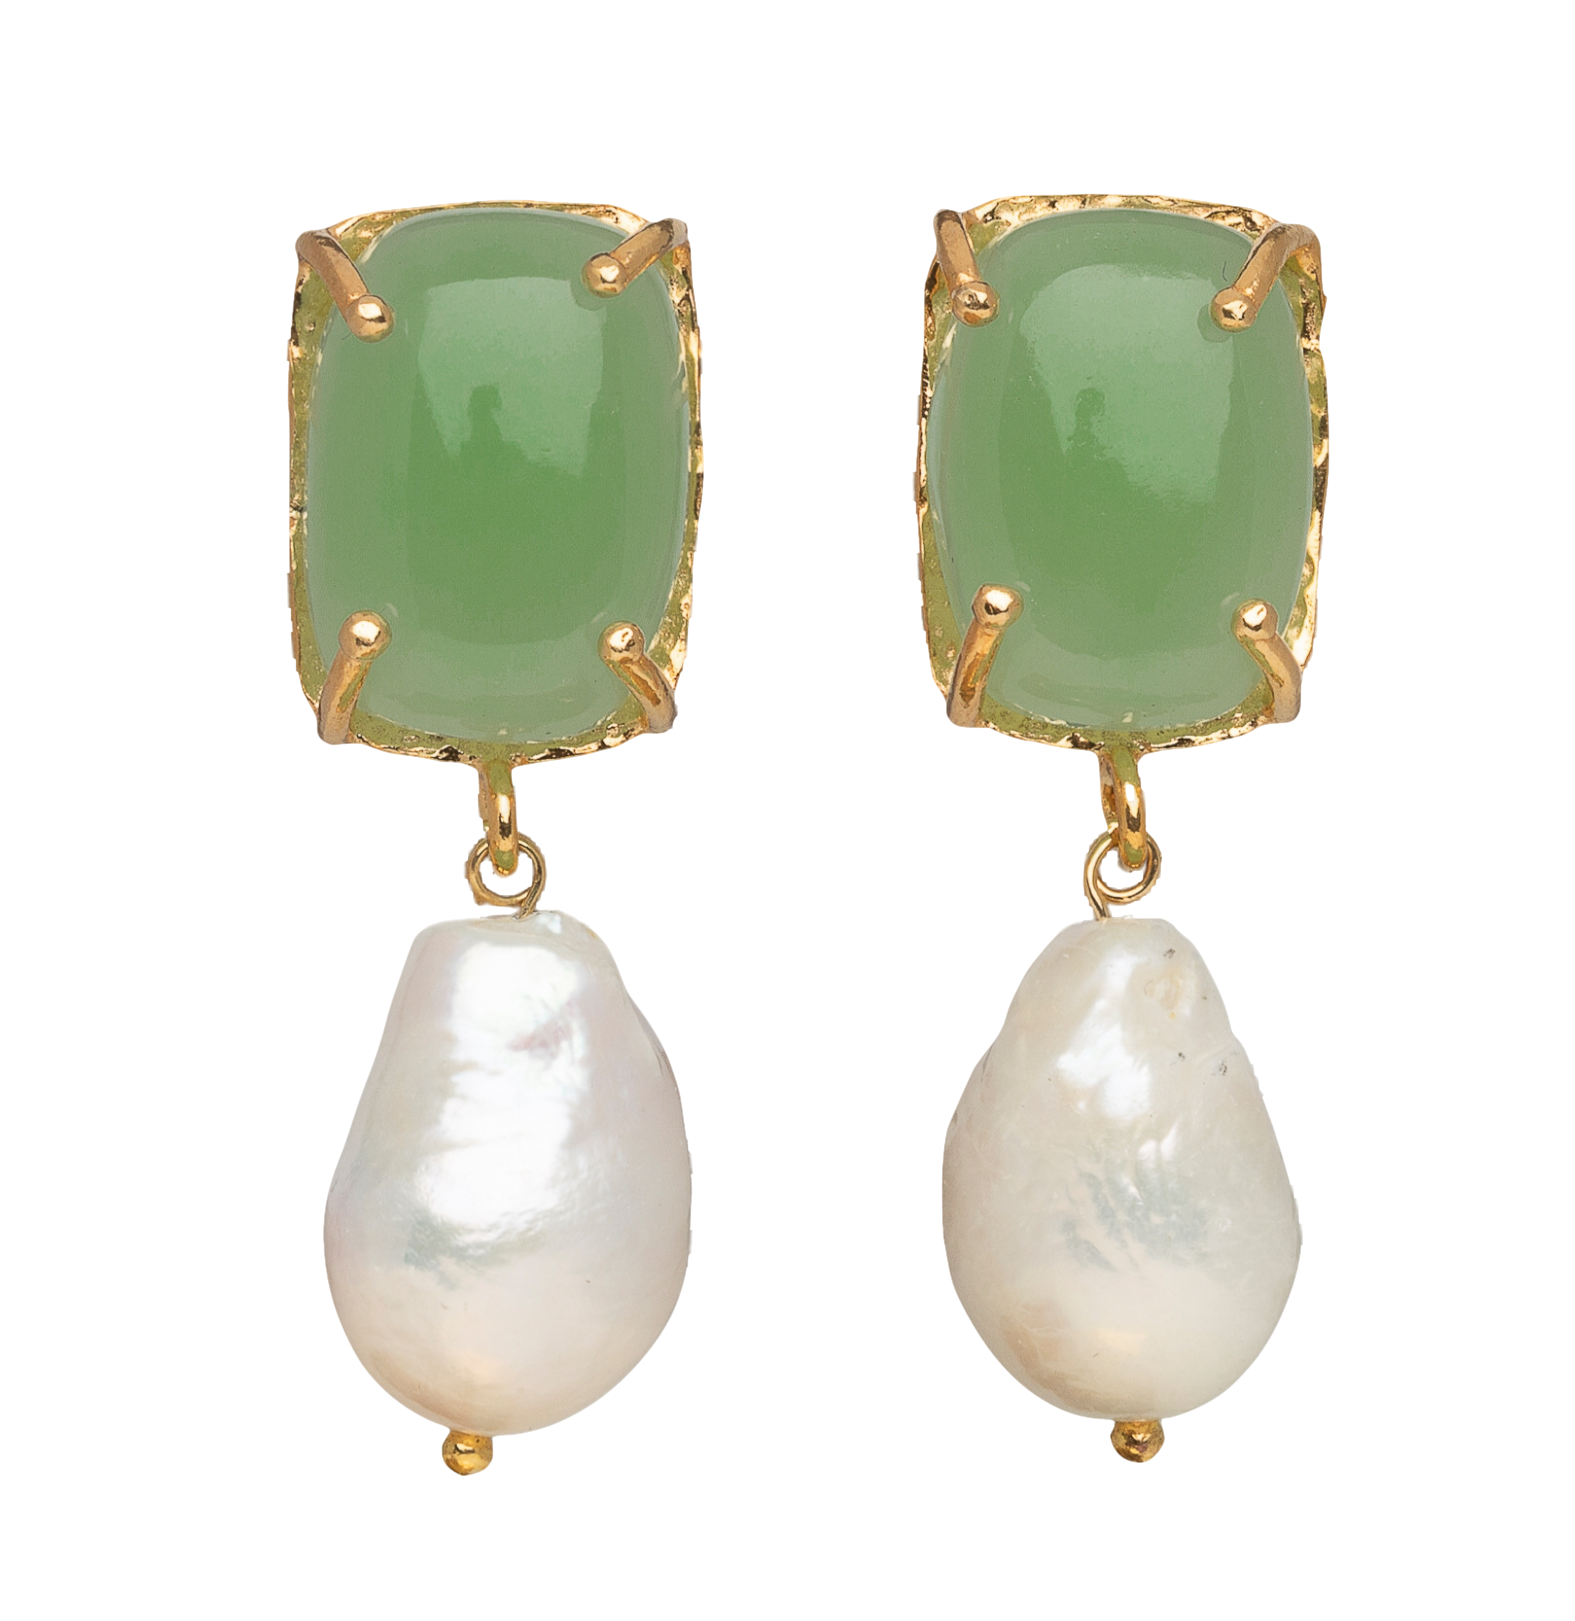 Christie Nicolaides Piccola Earrings Green